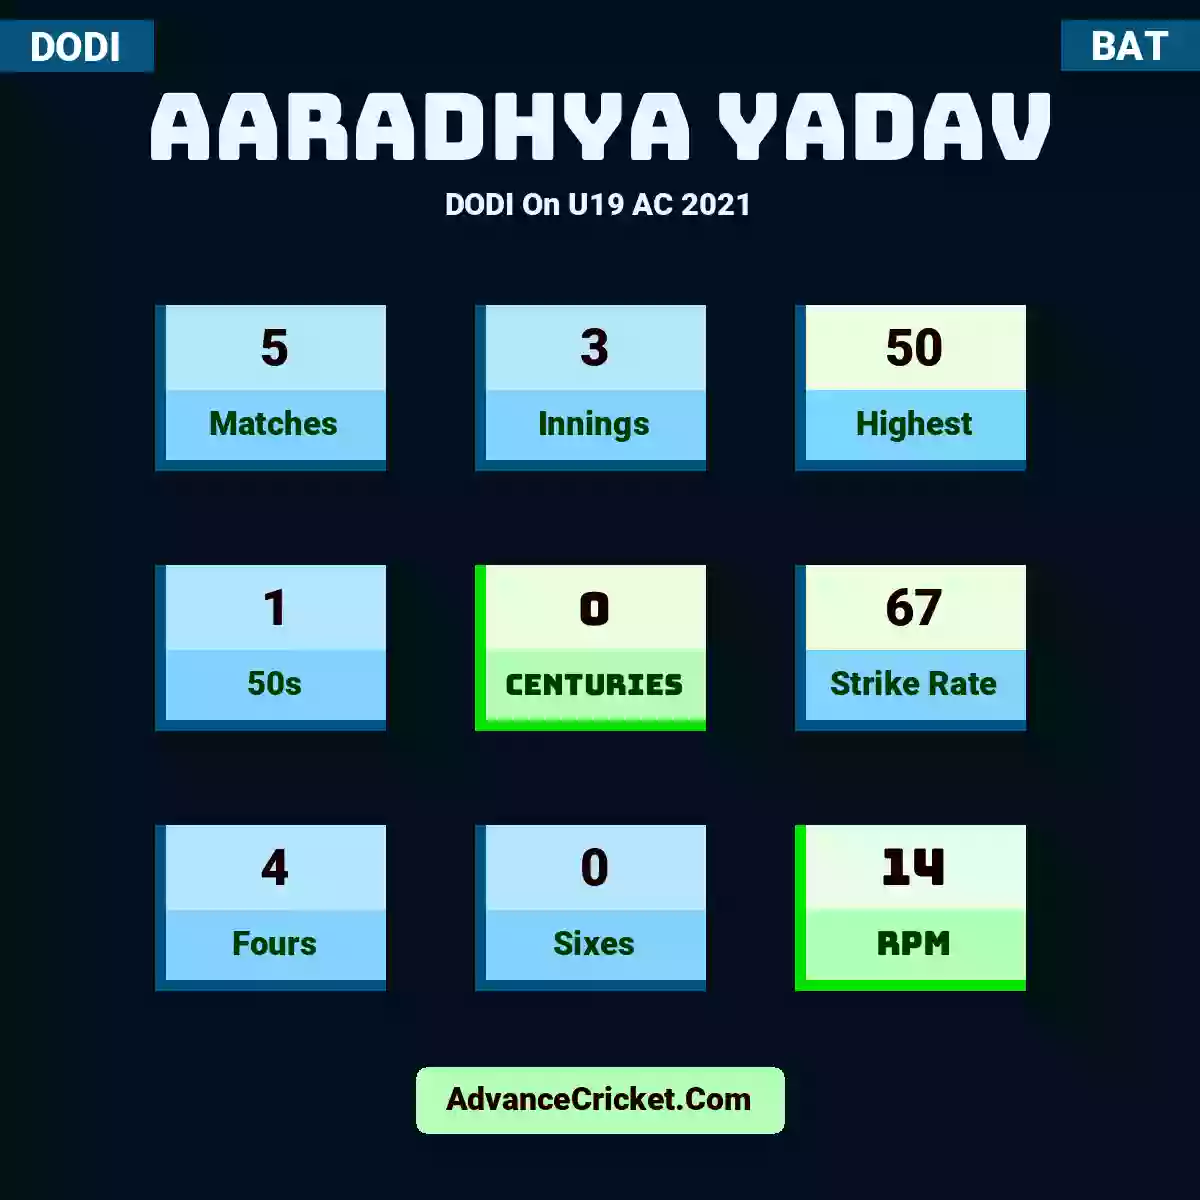 Aaradhya Yadav DODI  On U19 AC 2021, Aaradhya Yadav played 5 matches, scored 50 runs as highest, 1 half-centuries, and 0 centuries, with a strike rate of 67. A.Yadav hit 4 fours and 0 sixes, with an RPM of 14.